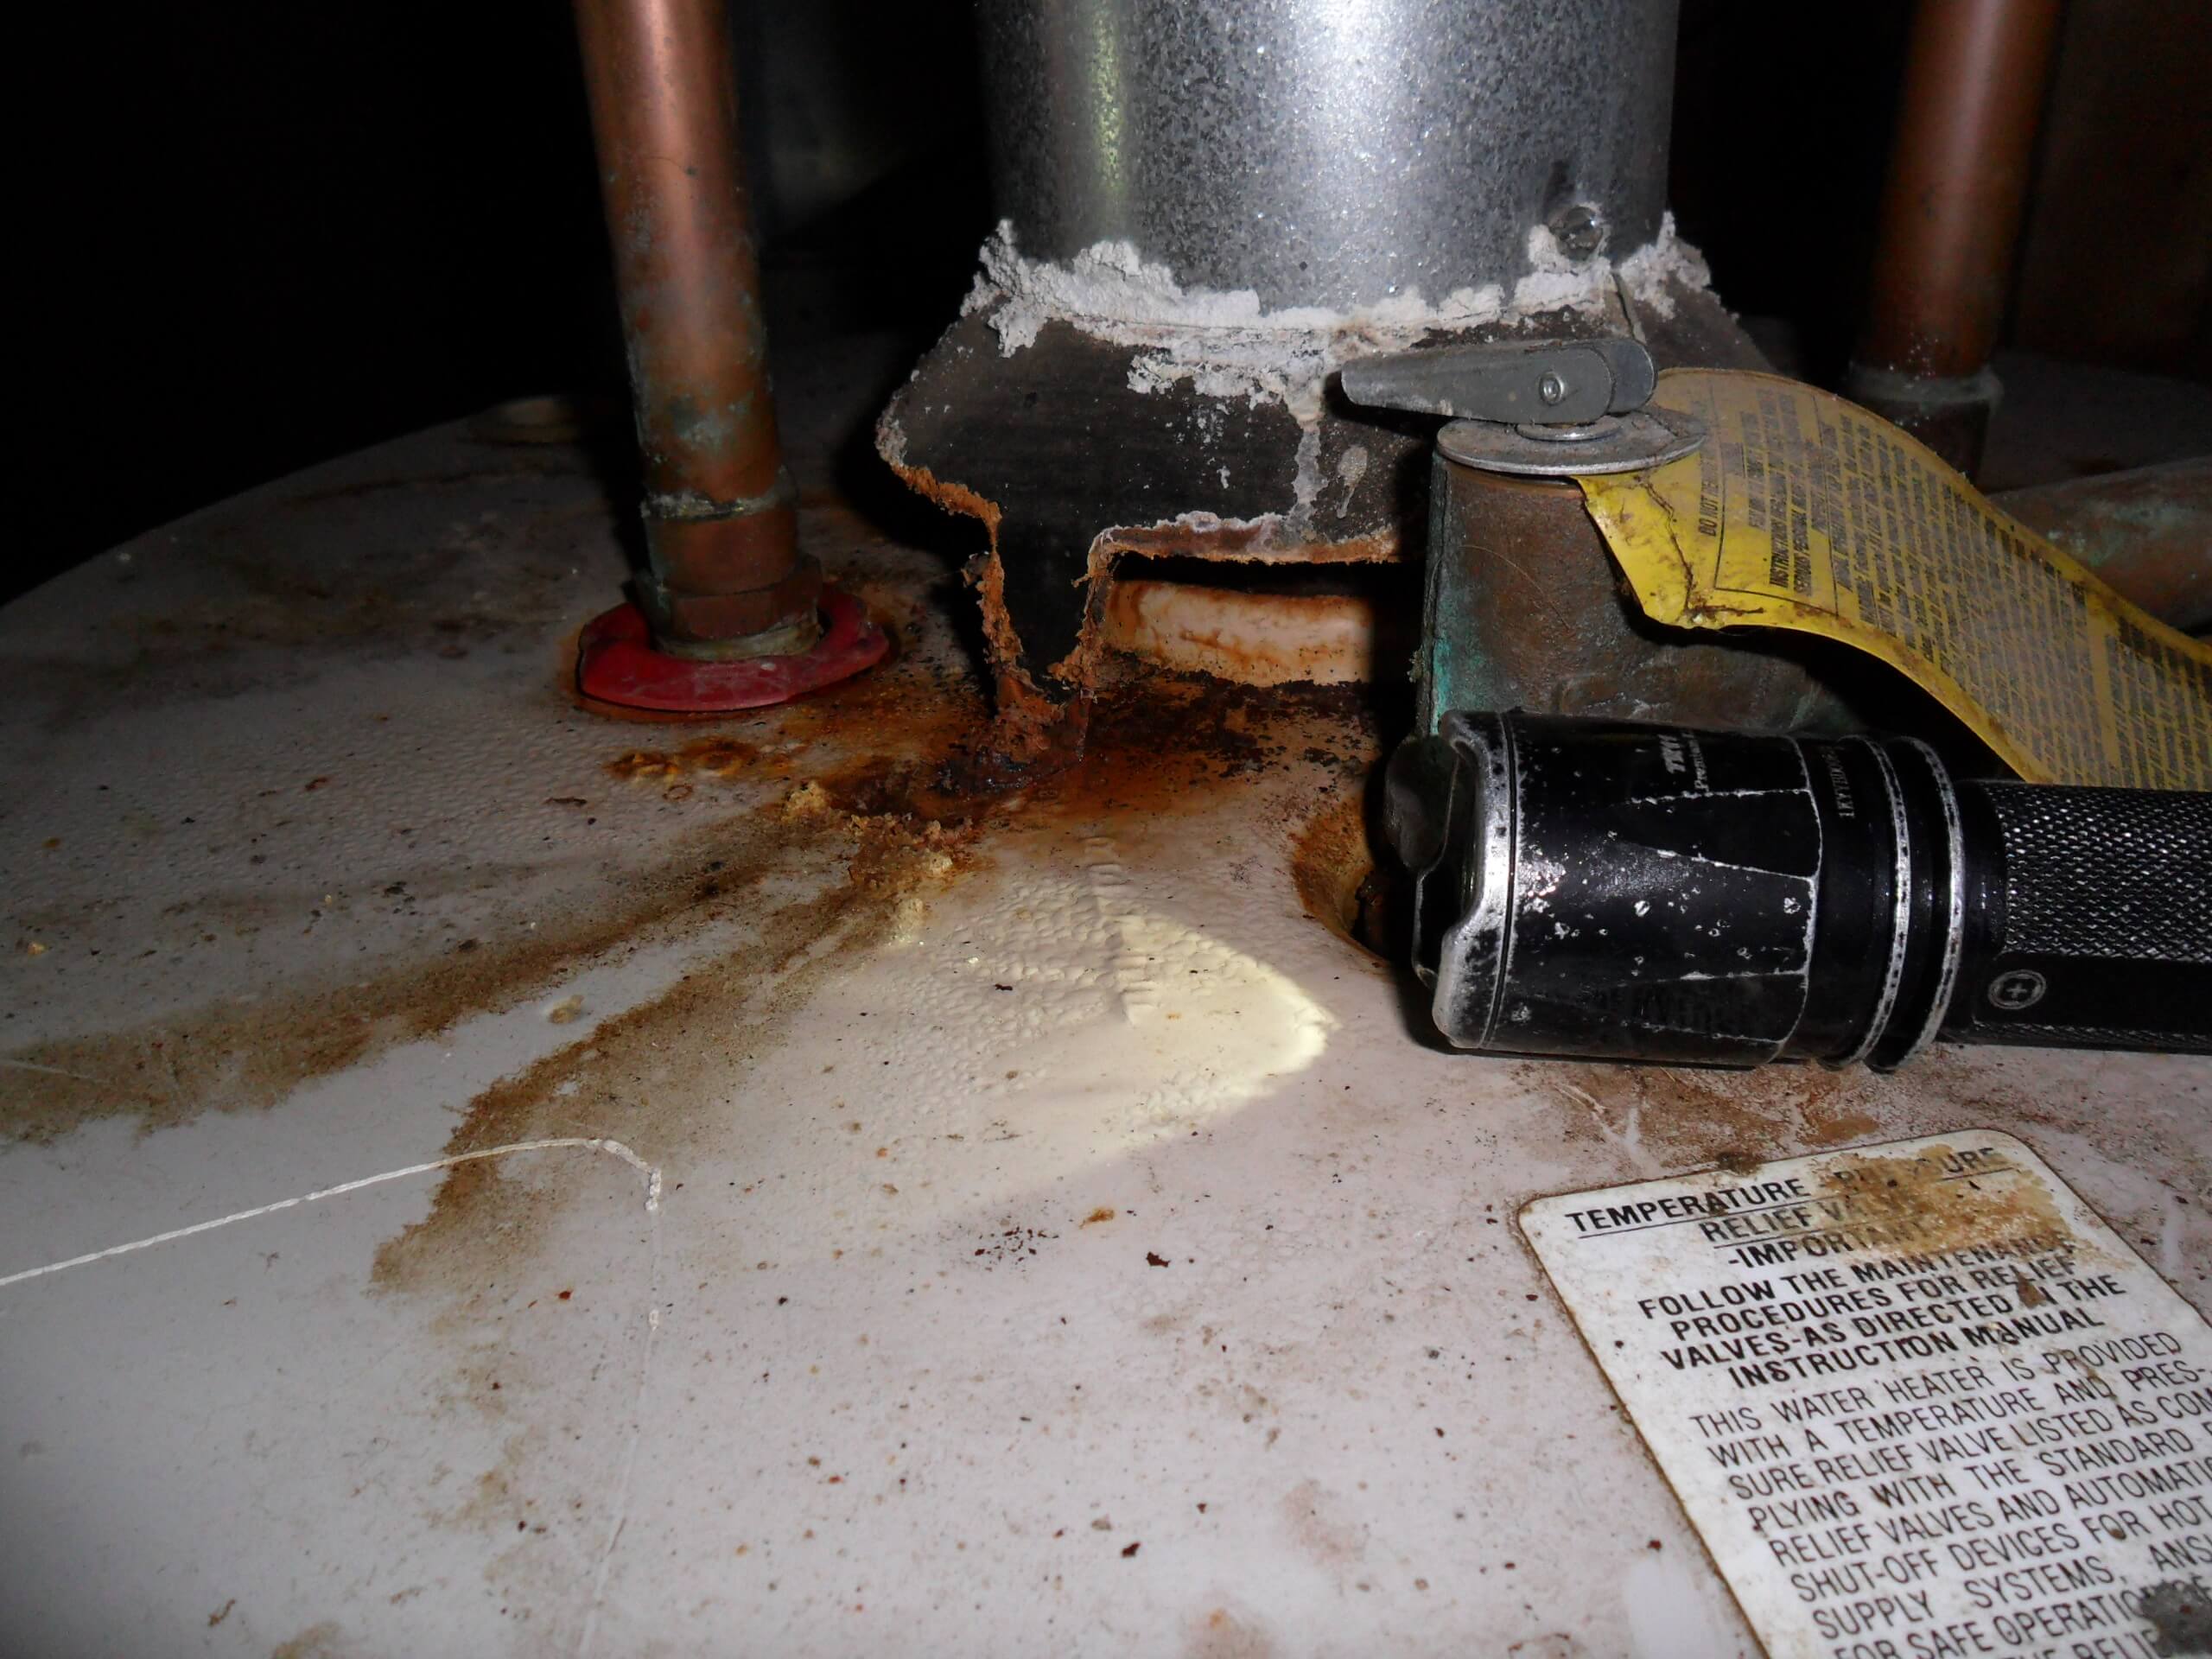 heater water backdrafting tank moisture why cold condensate pipes condensation signs matters